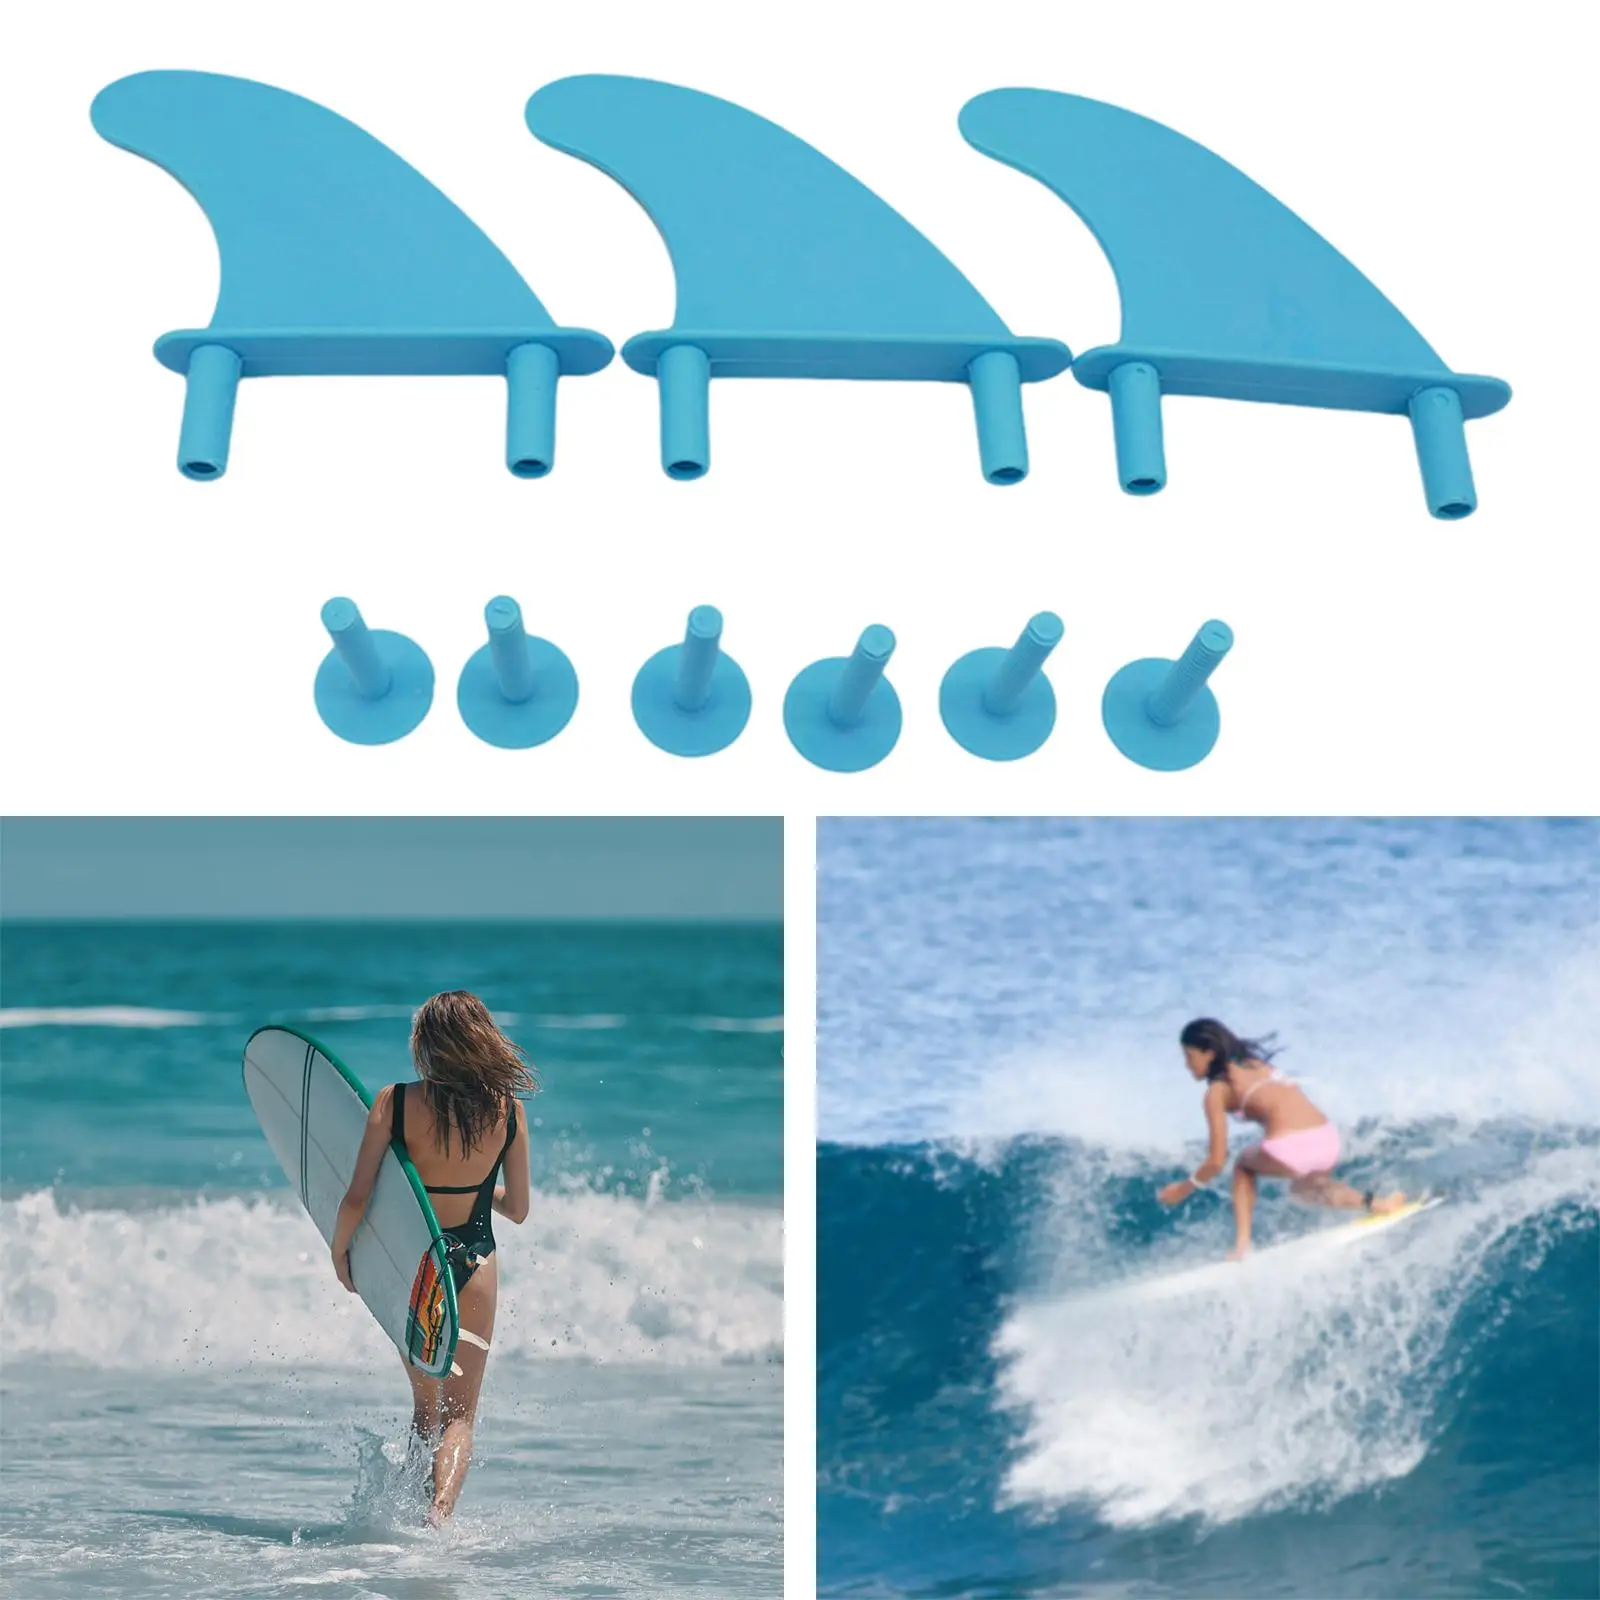 3Pcs Surf Fin Screws Parts Replacement Easy to Install Soft Top Surfboard Fins Longboard Thruster Fins for Beach Surfing Summer